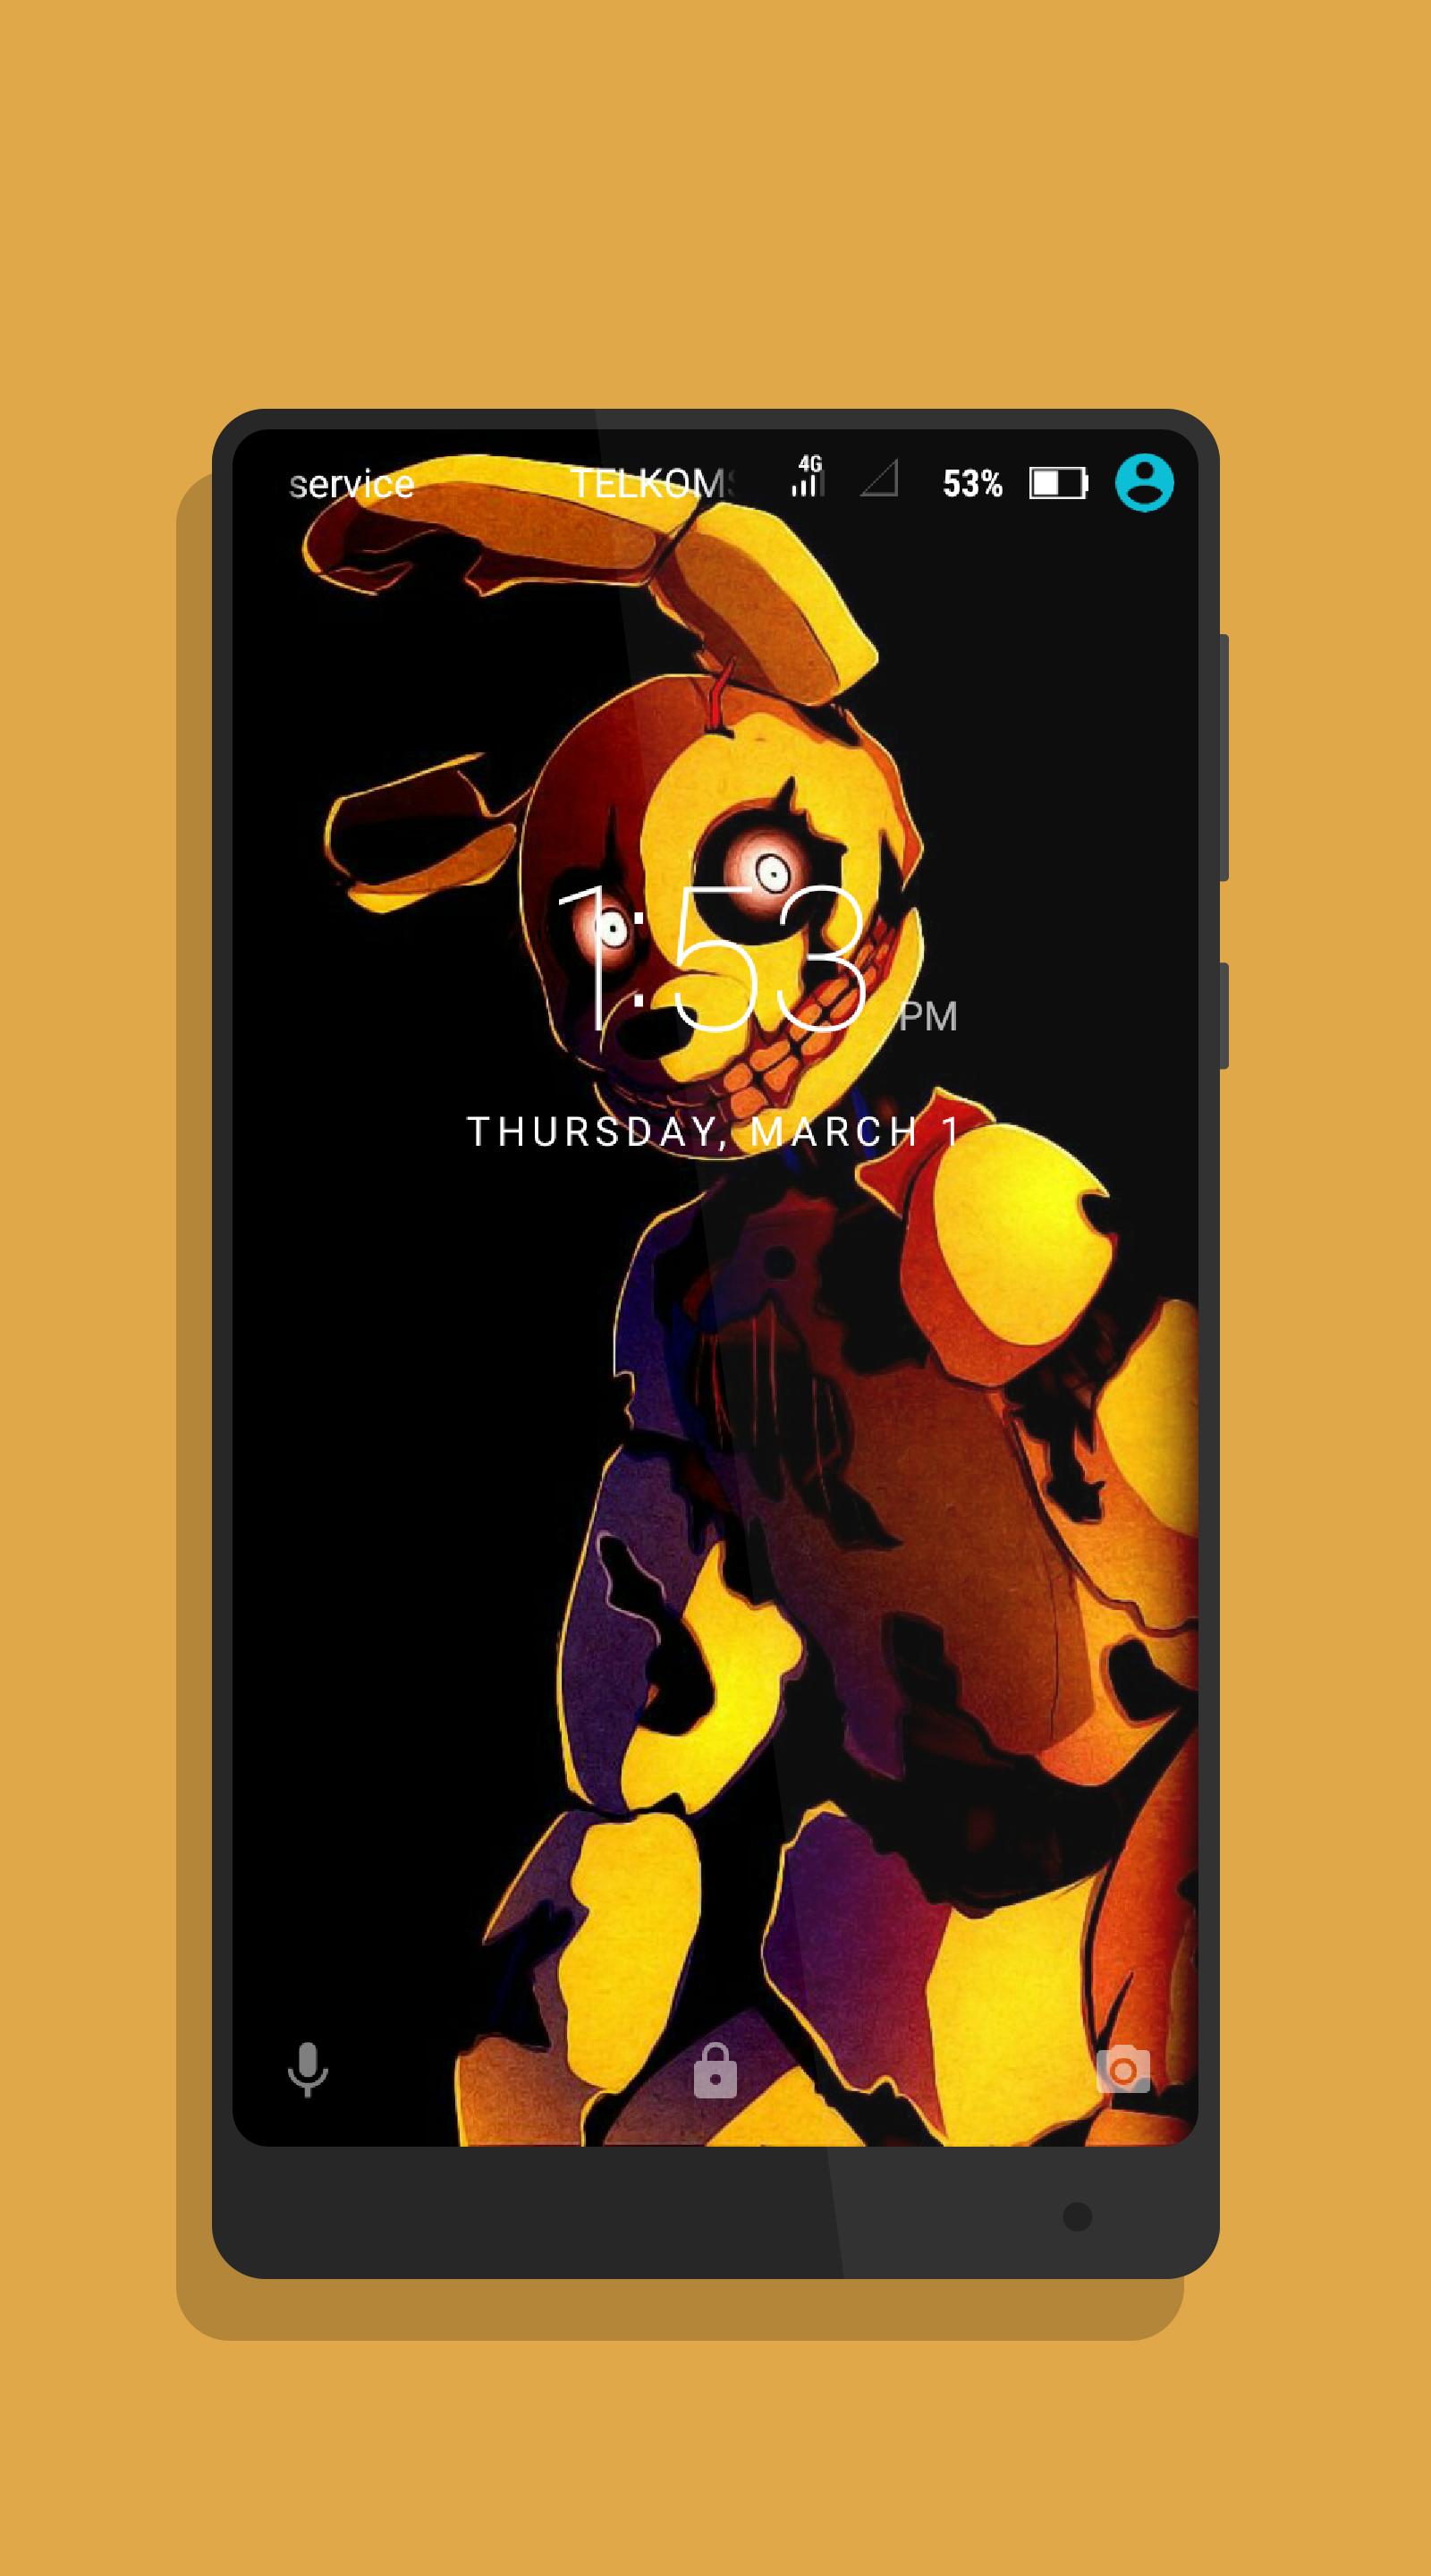 Springtrap Wallpaper For Android Apk Download